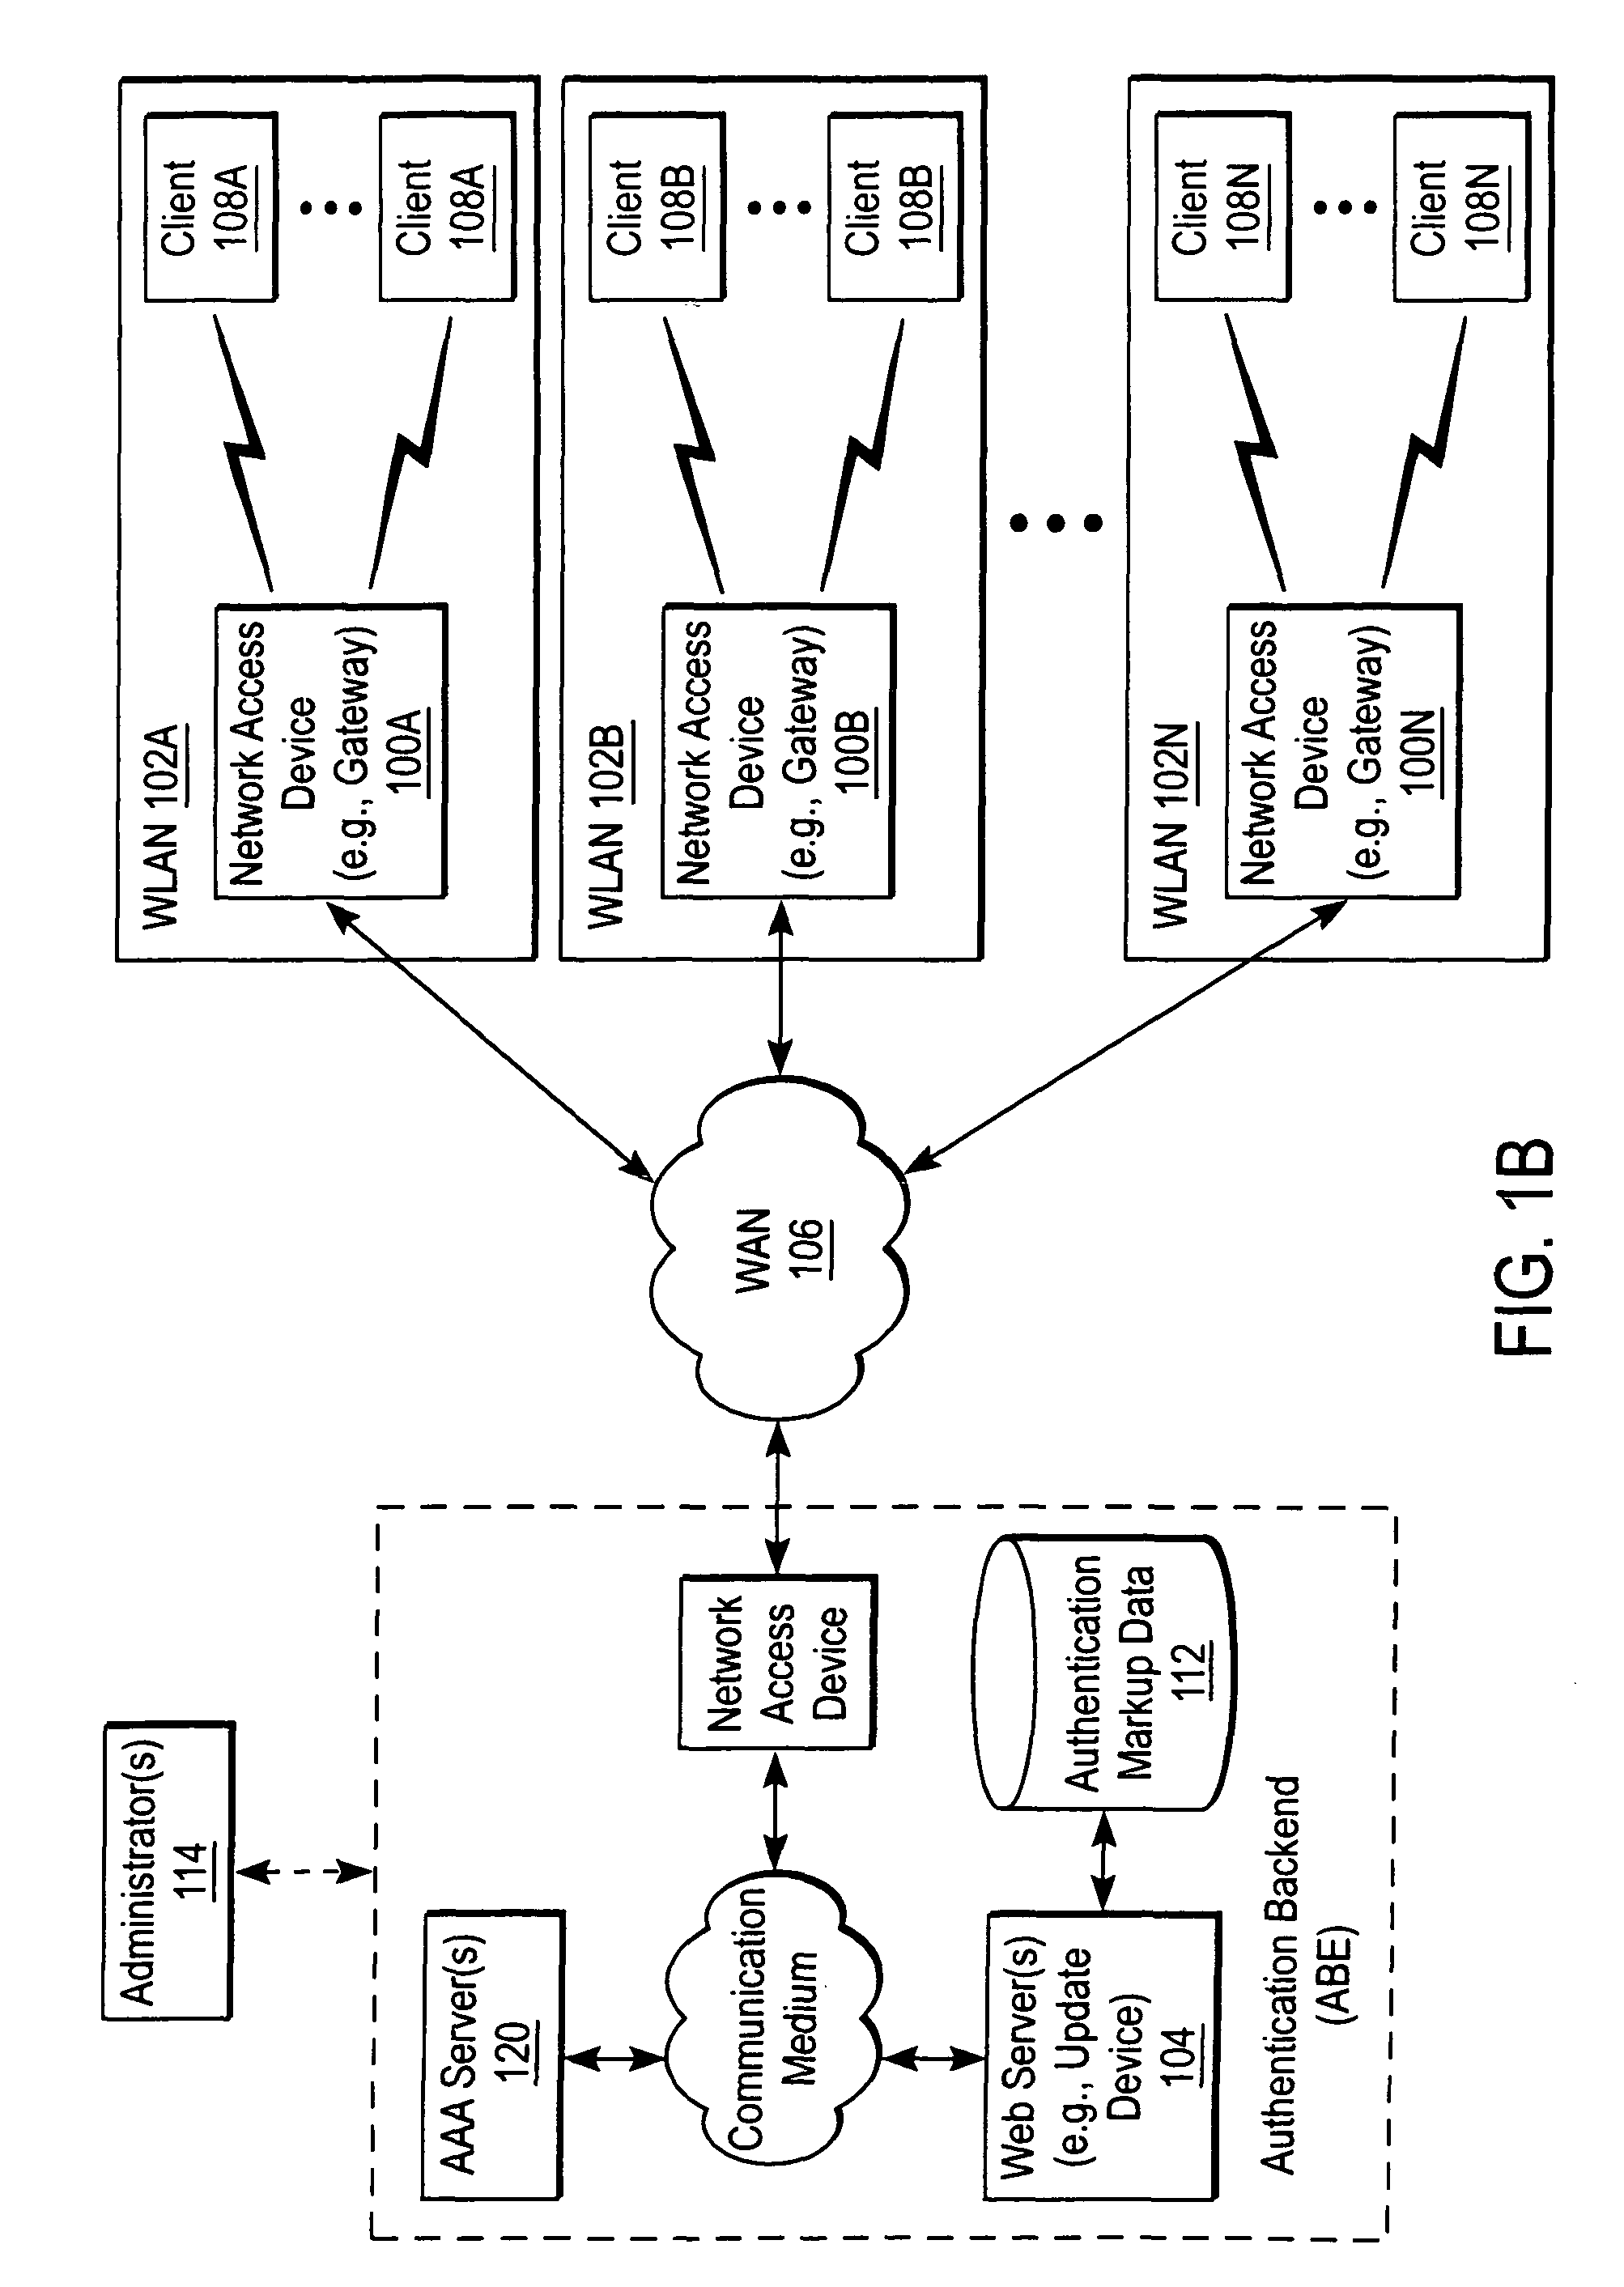 Authentication mark-up data of multiple local area networks